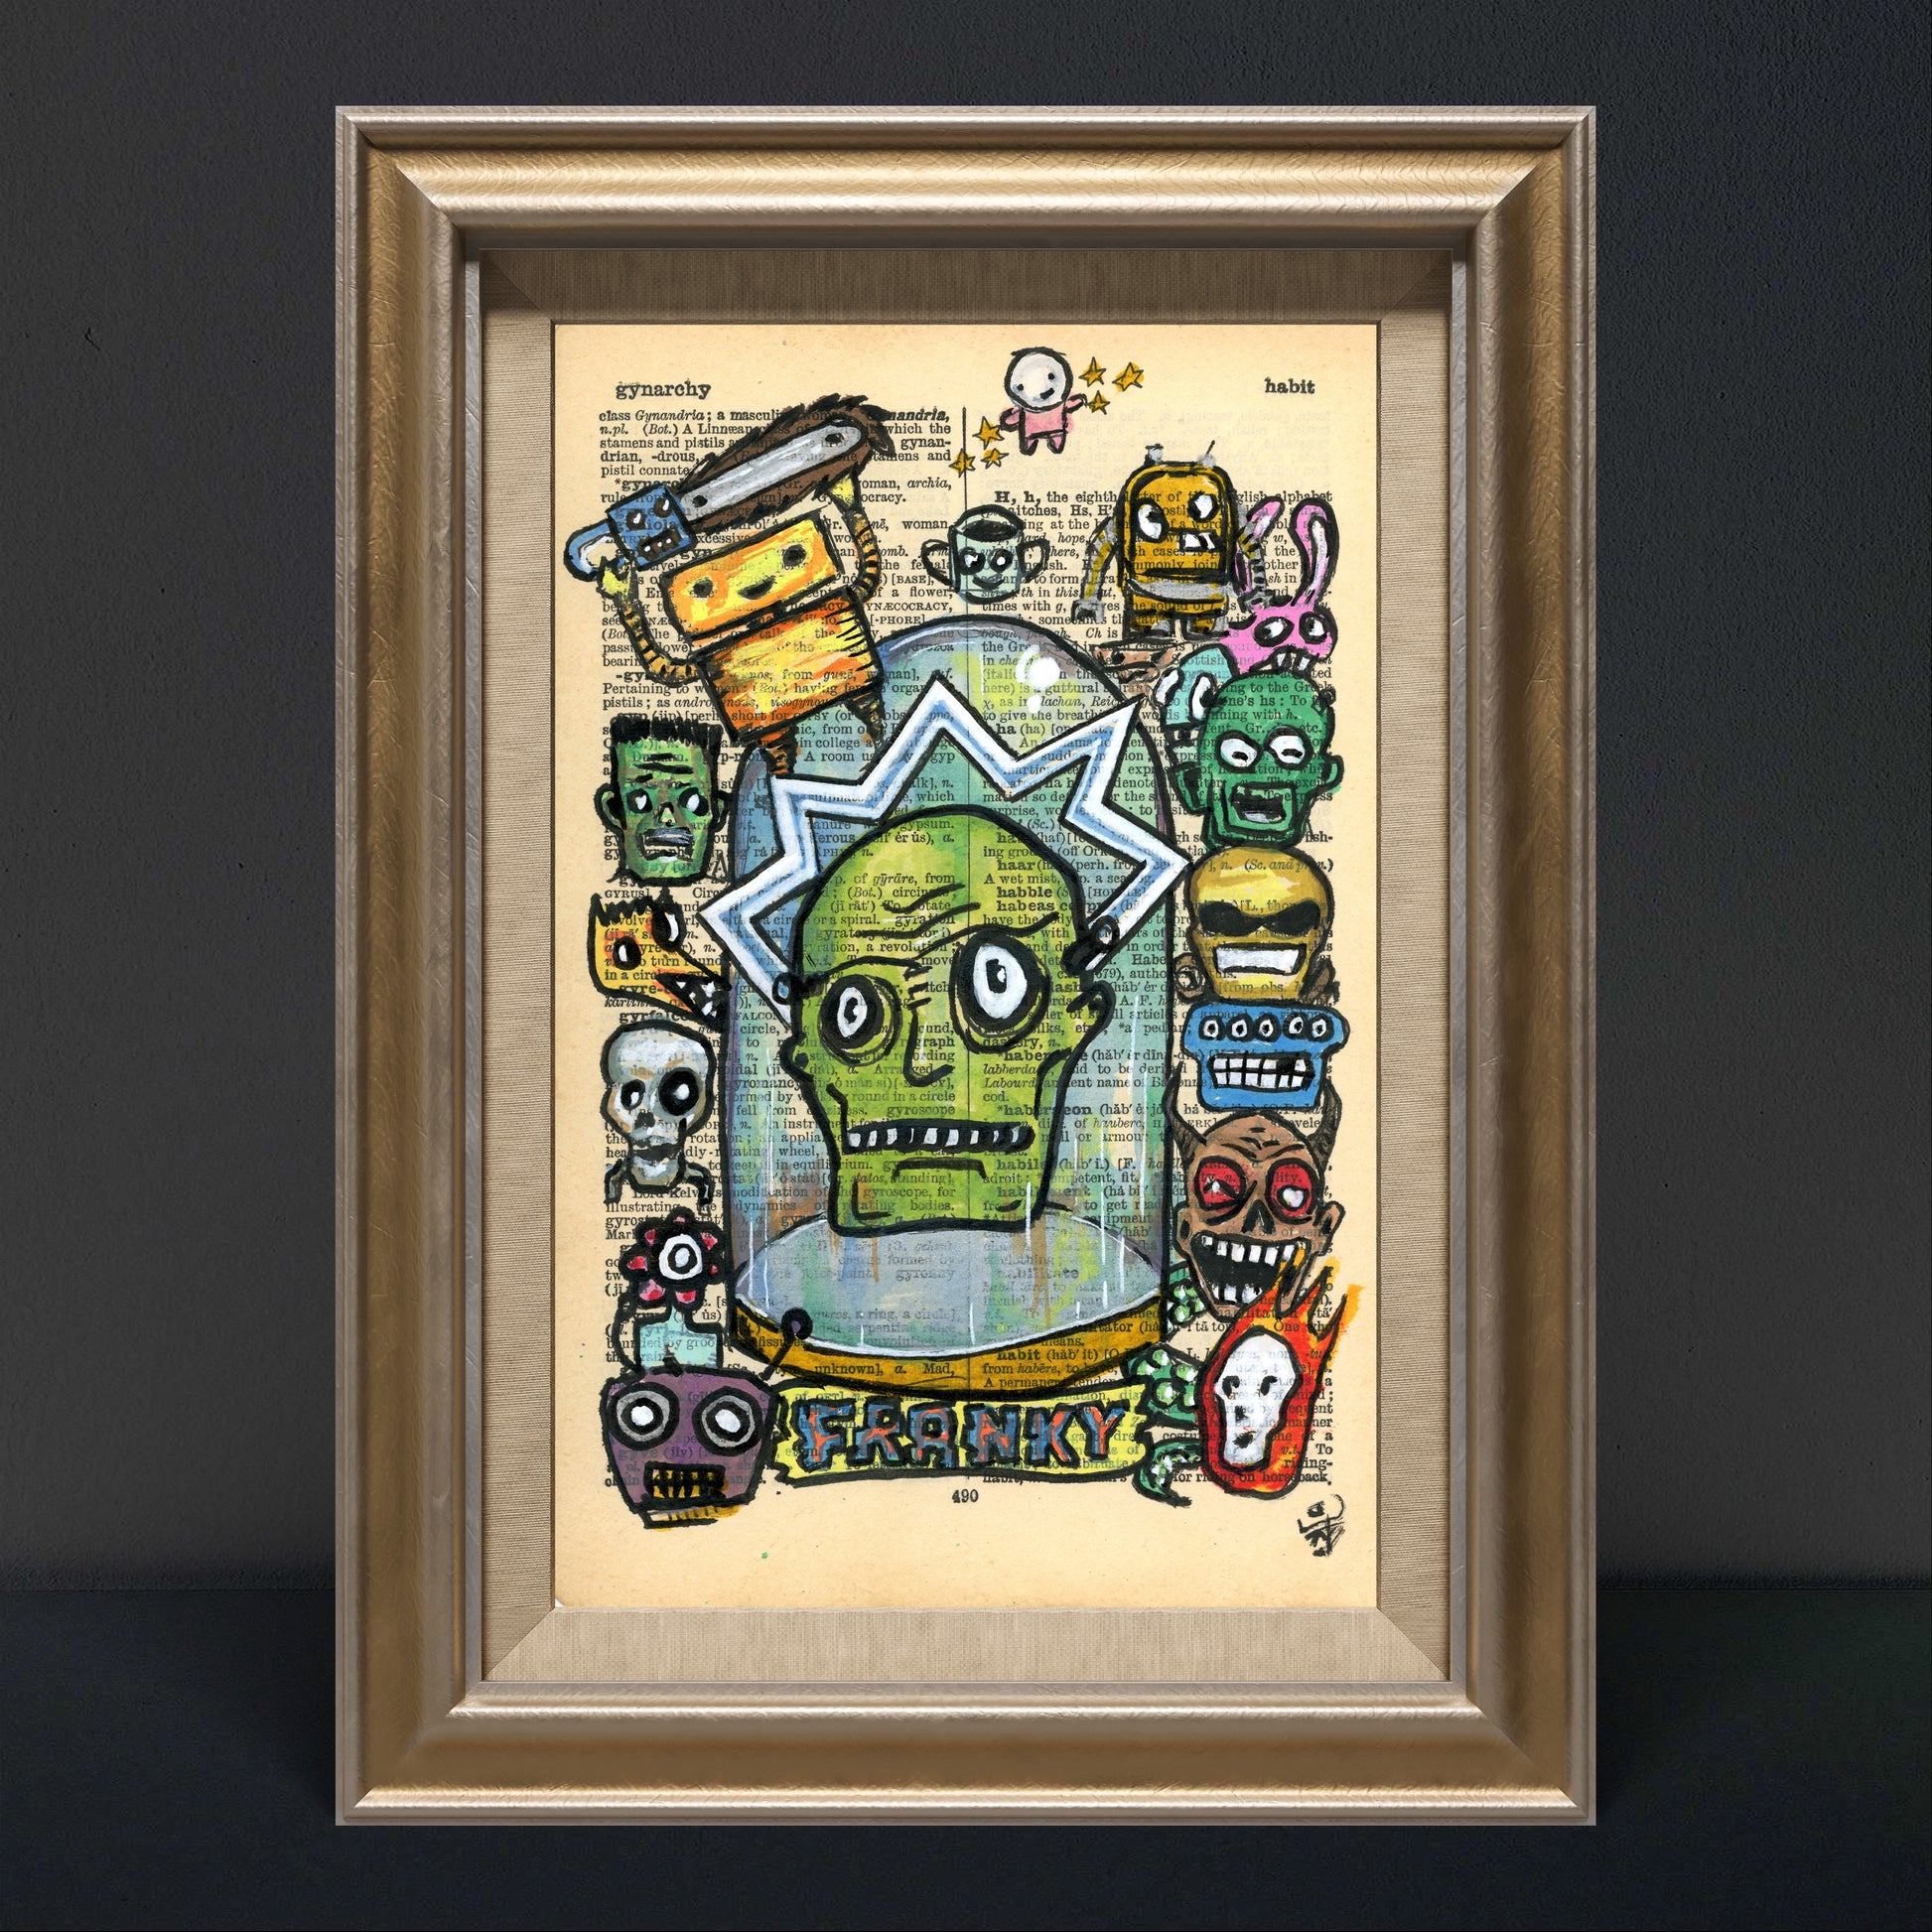 Green-headed Franky in a glass jar with funny faces, created on an upcycled vintage dictionary page.